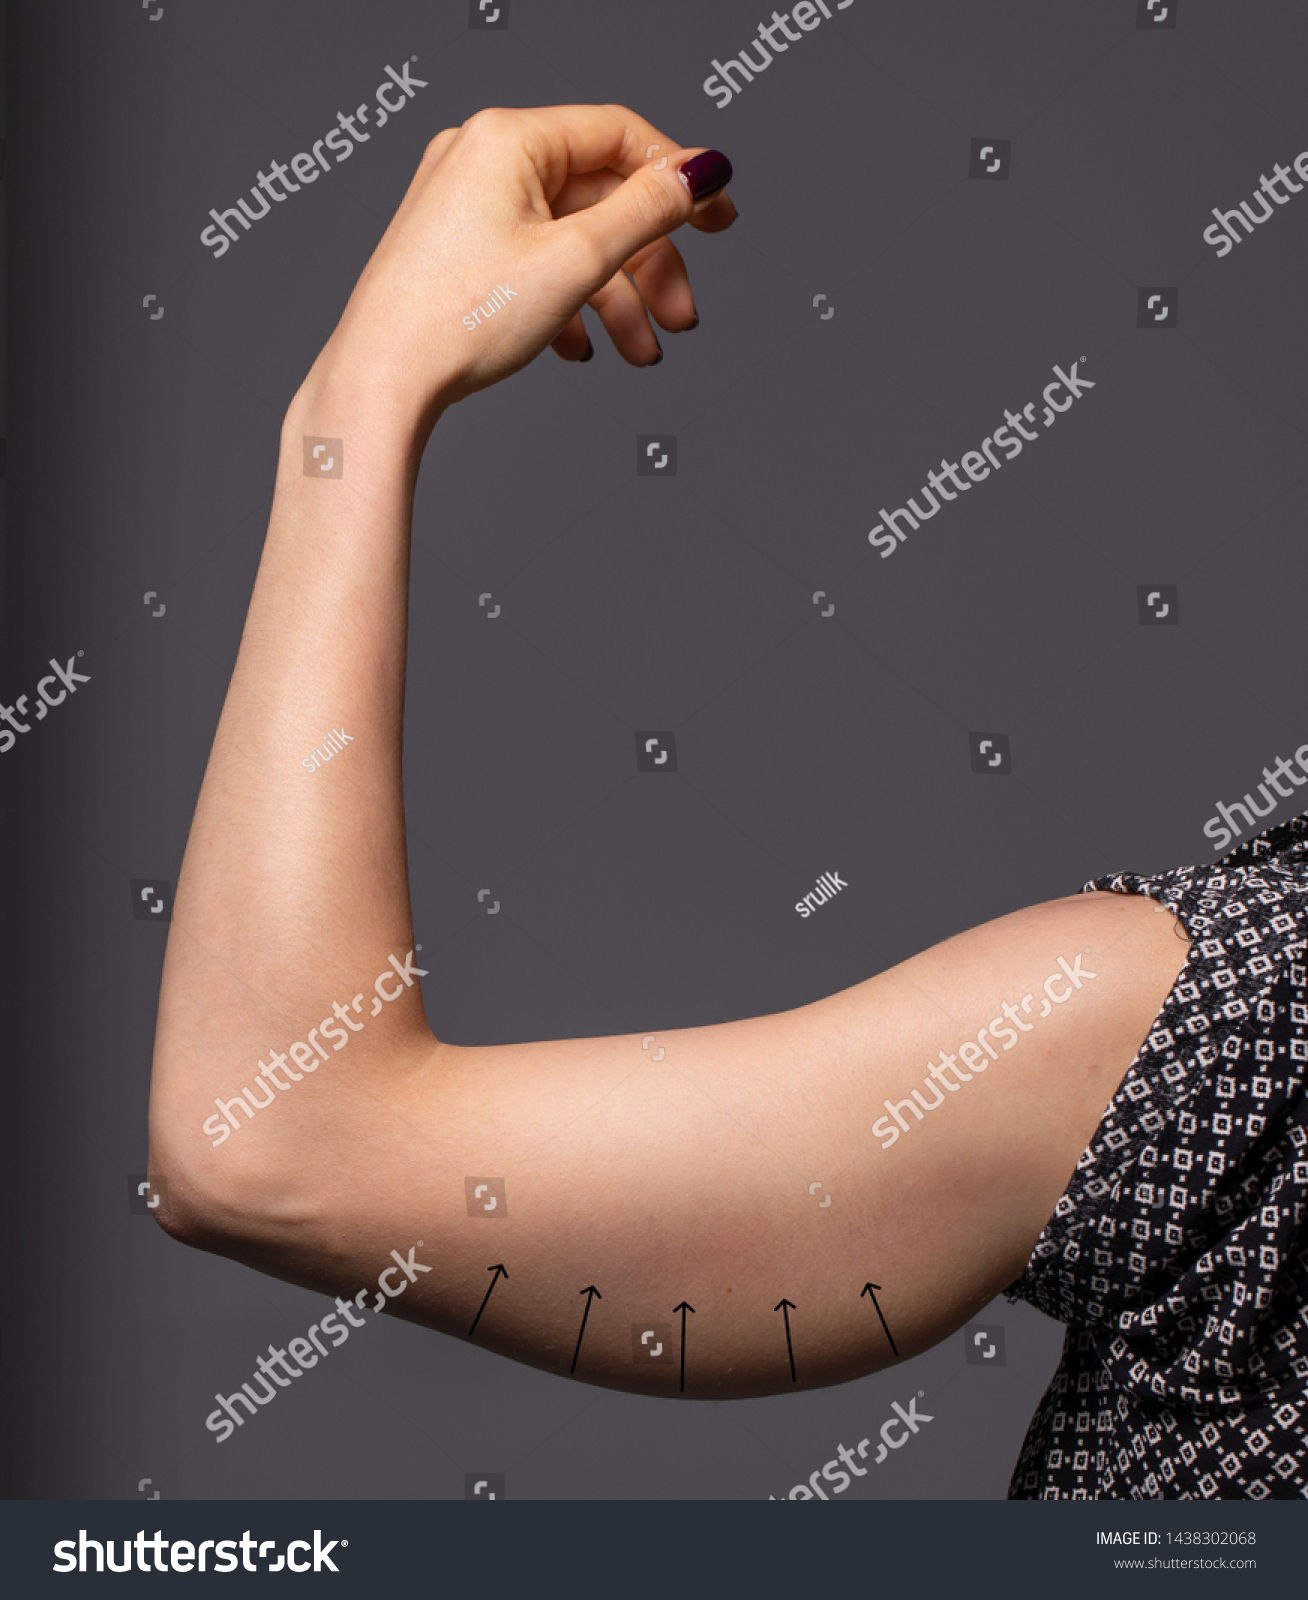 A young woman’s arm is seen up close before a brachioplasty procedure. Arrows point up to show the direction the lady wishes the loose skin to go after successful surgery. #1438302068